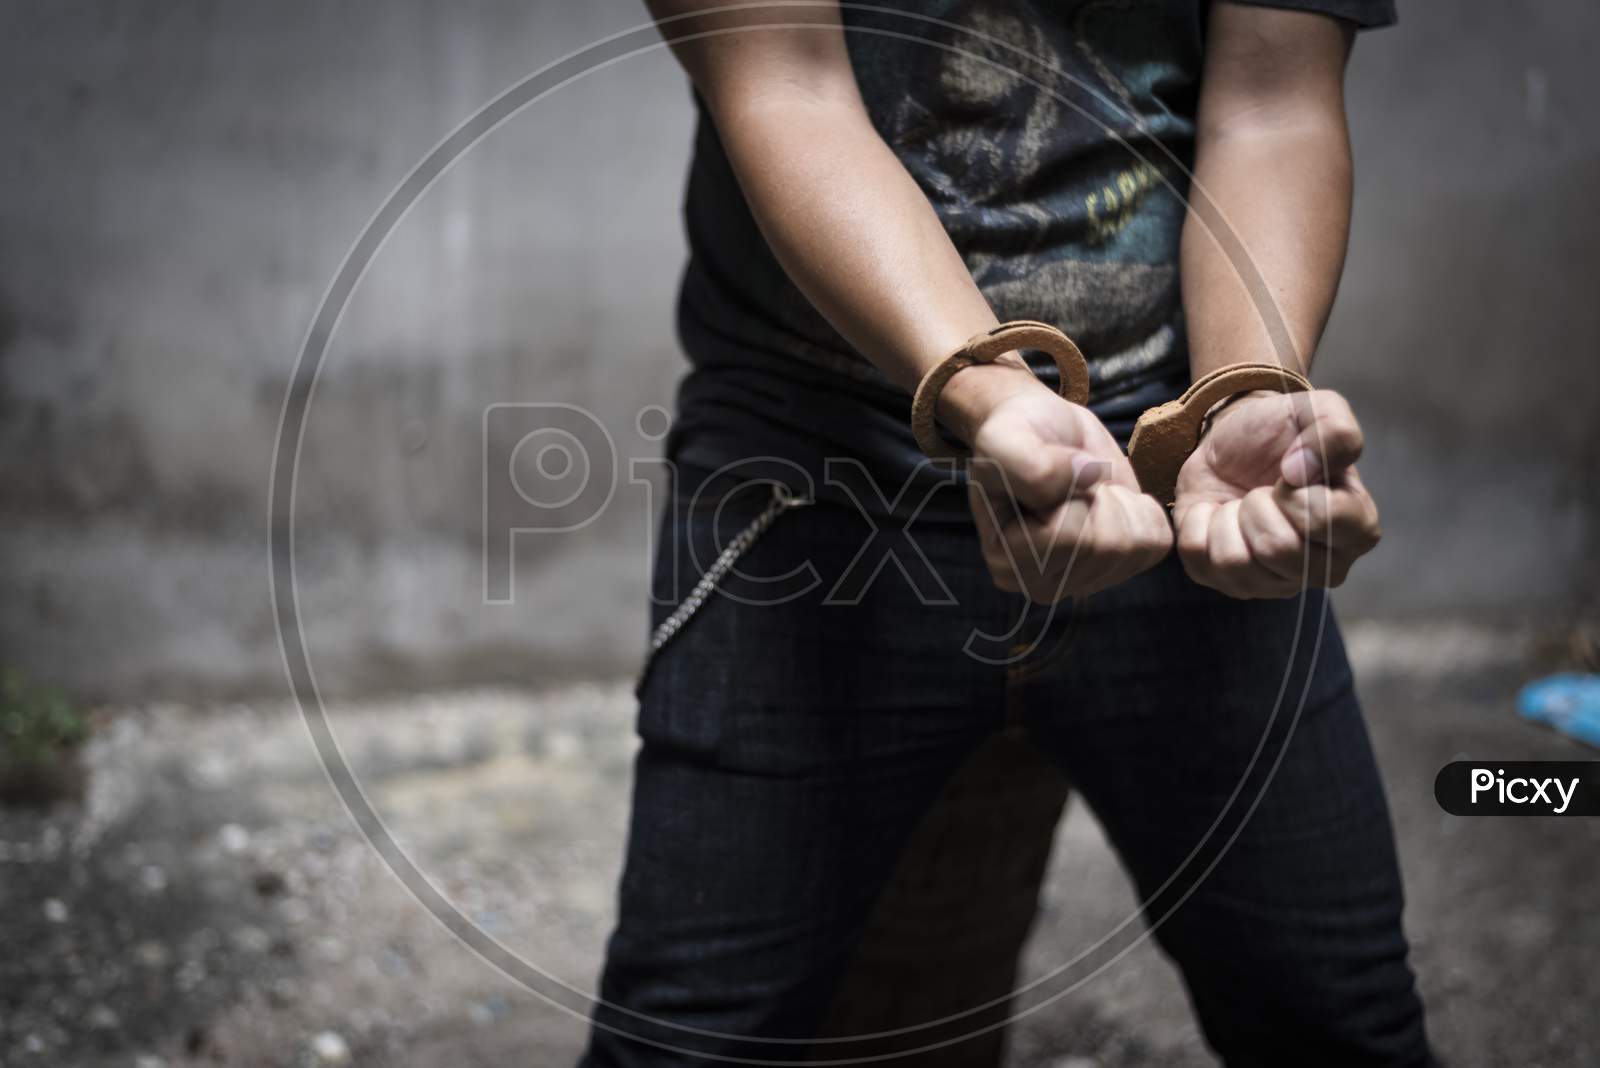 Handcuff With Prisoner In Jail, Criminal And Robber Concept. Dark Tone , Selective Focus On Handcuff